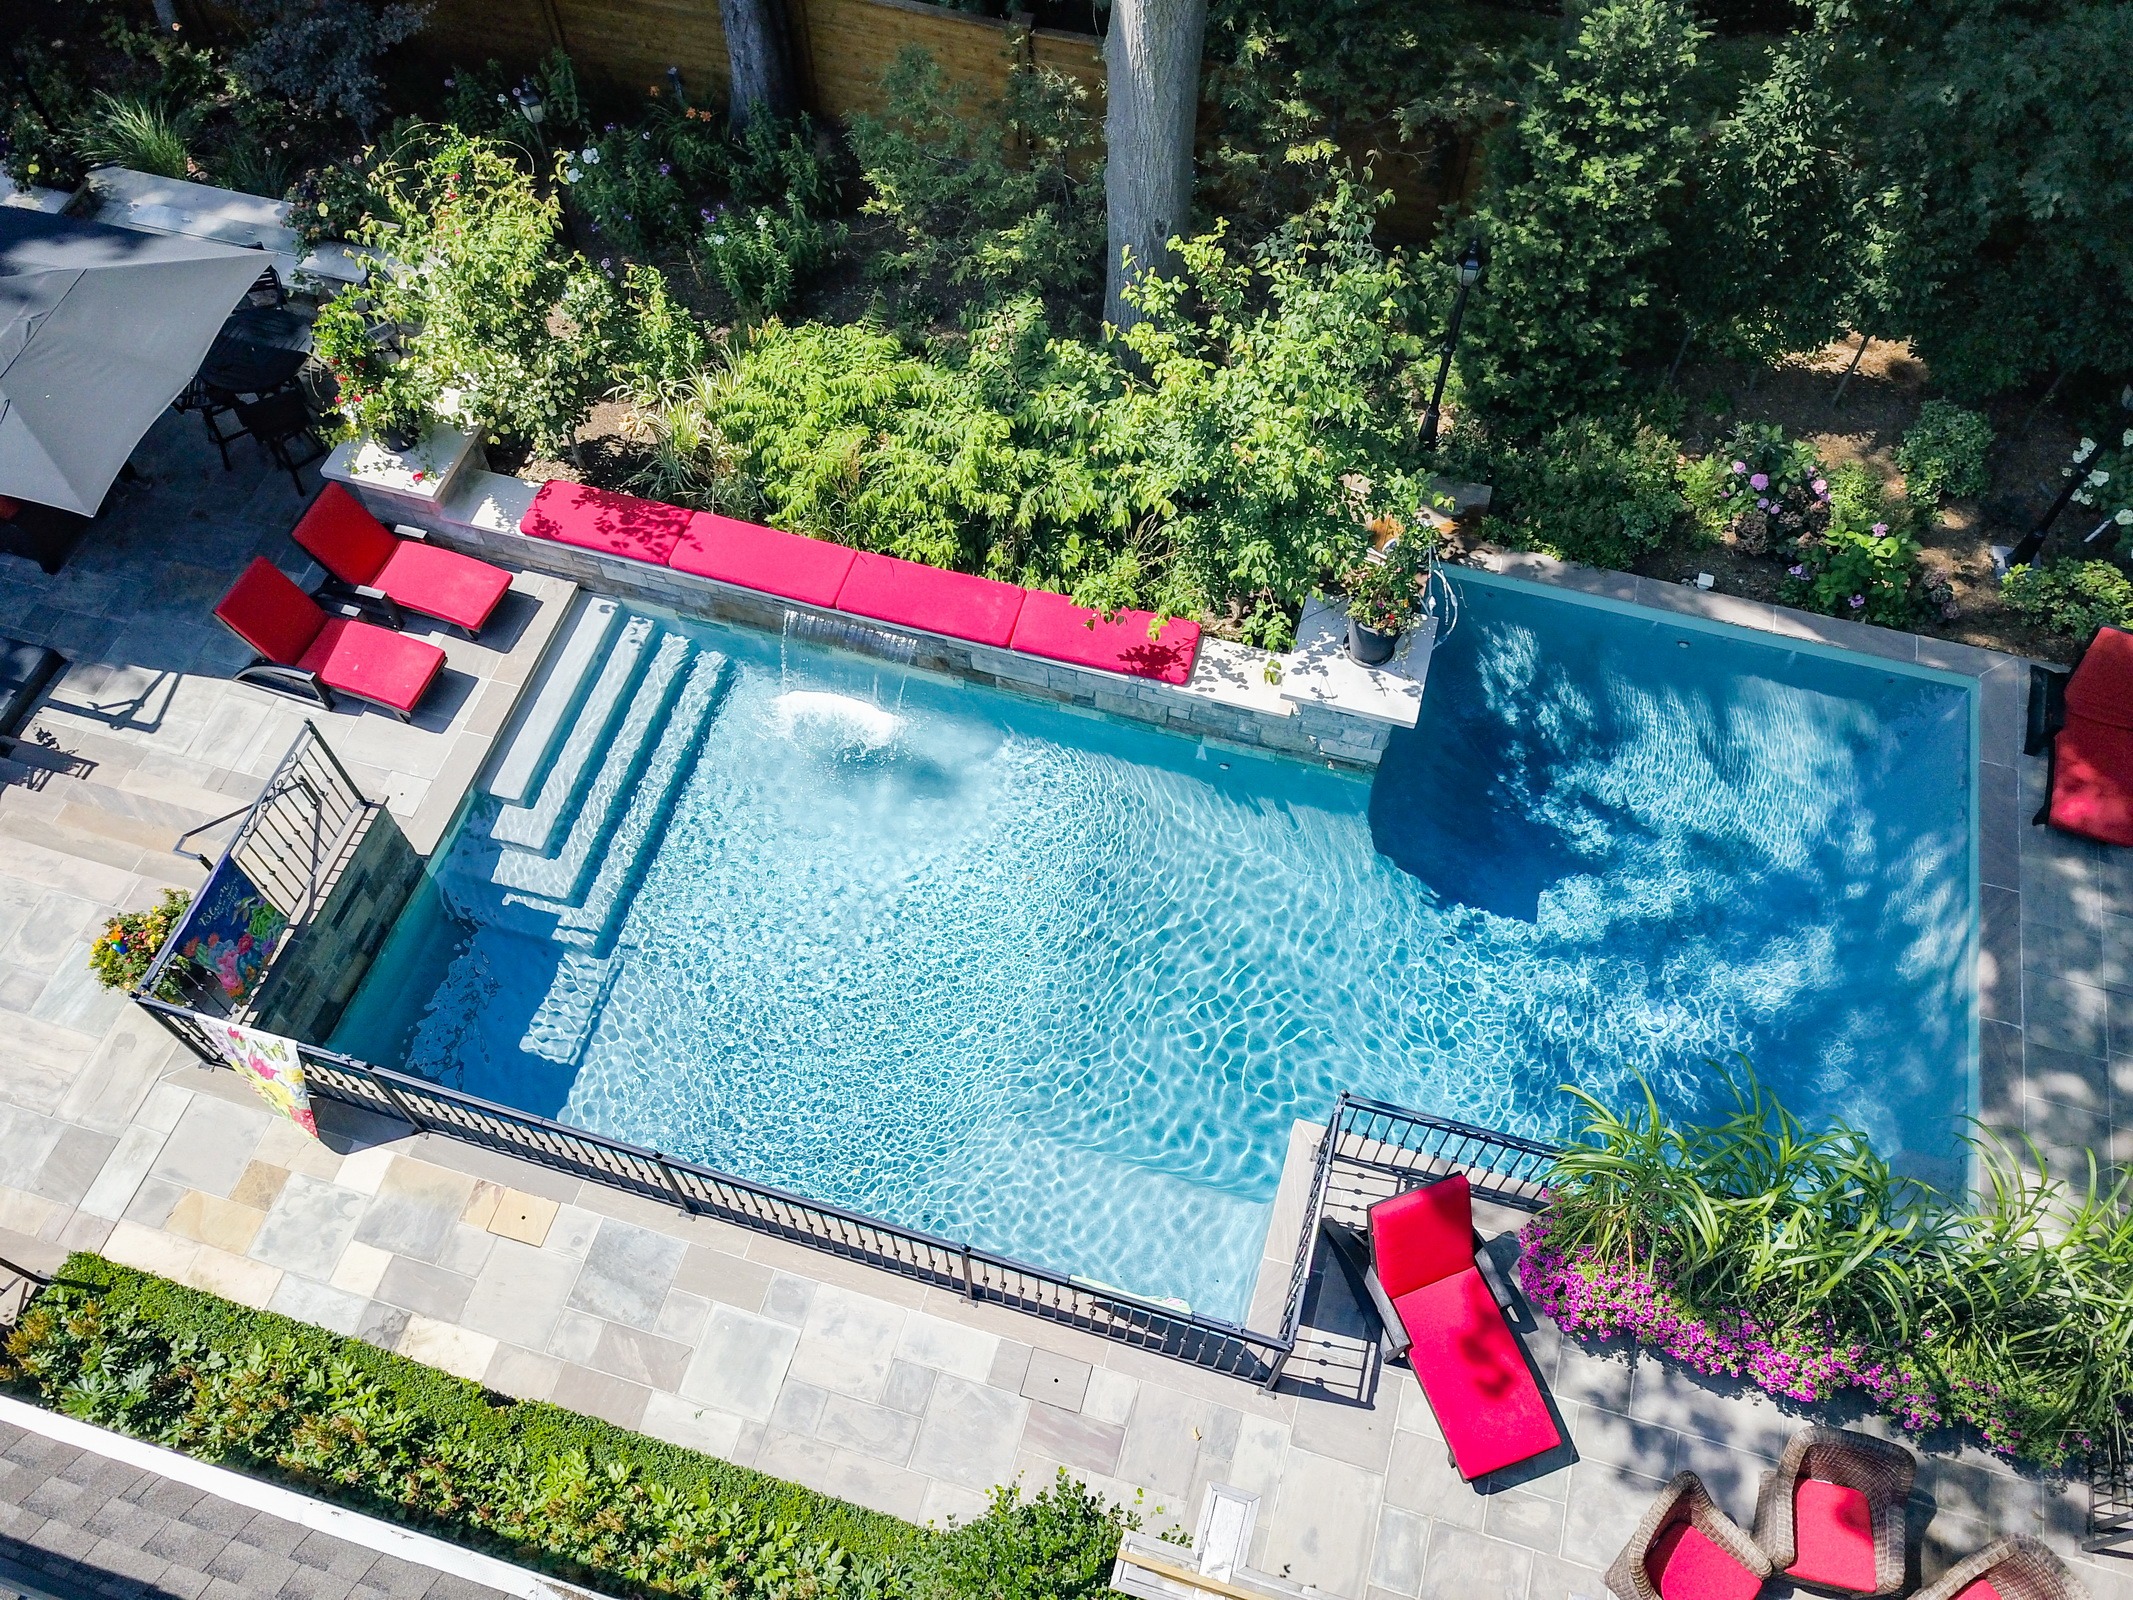 An aerial view of a backyard with a rectangular pool, surrounded by loungers, landscaping, and a patio area, on a sunny day.